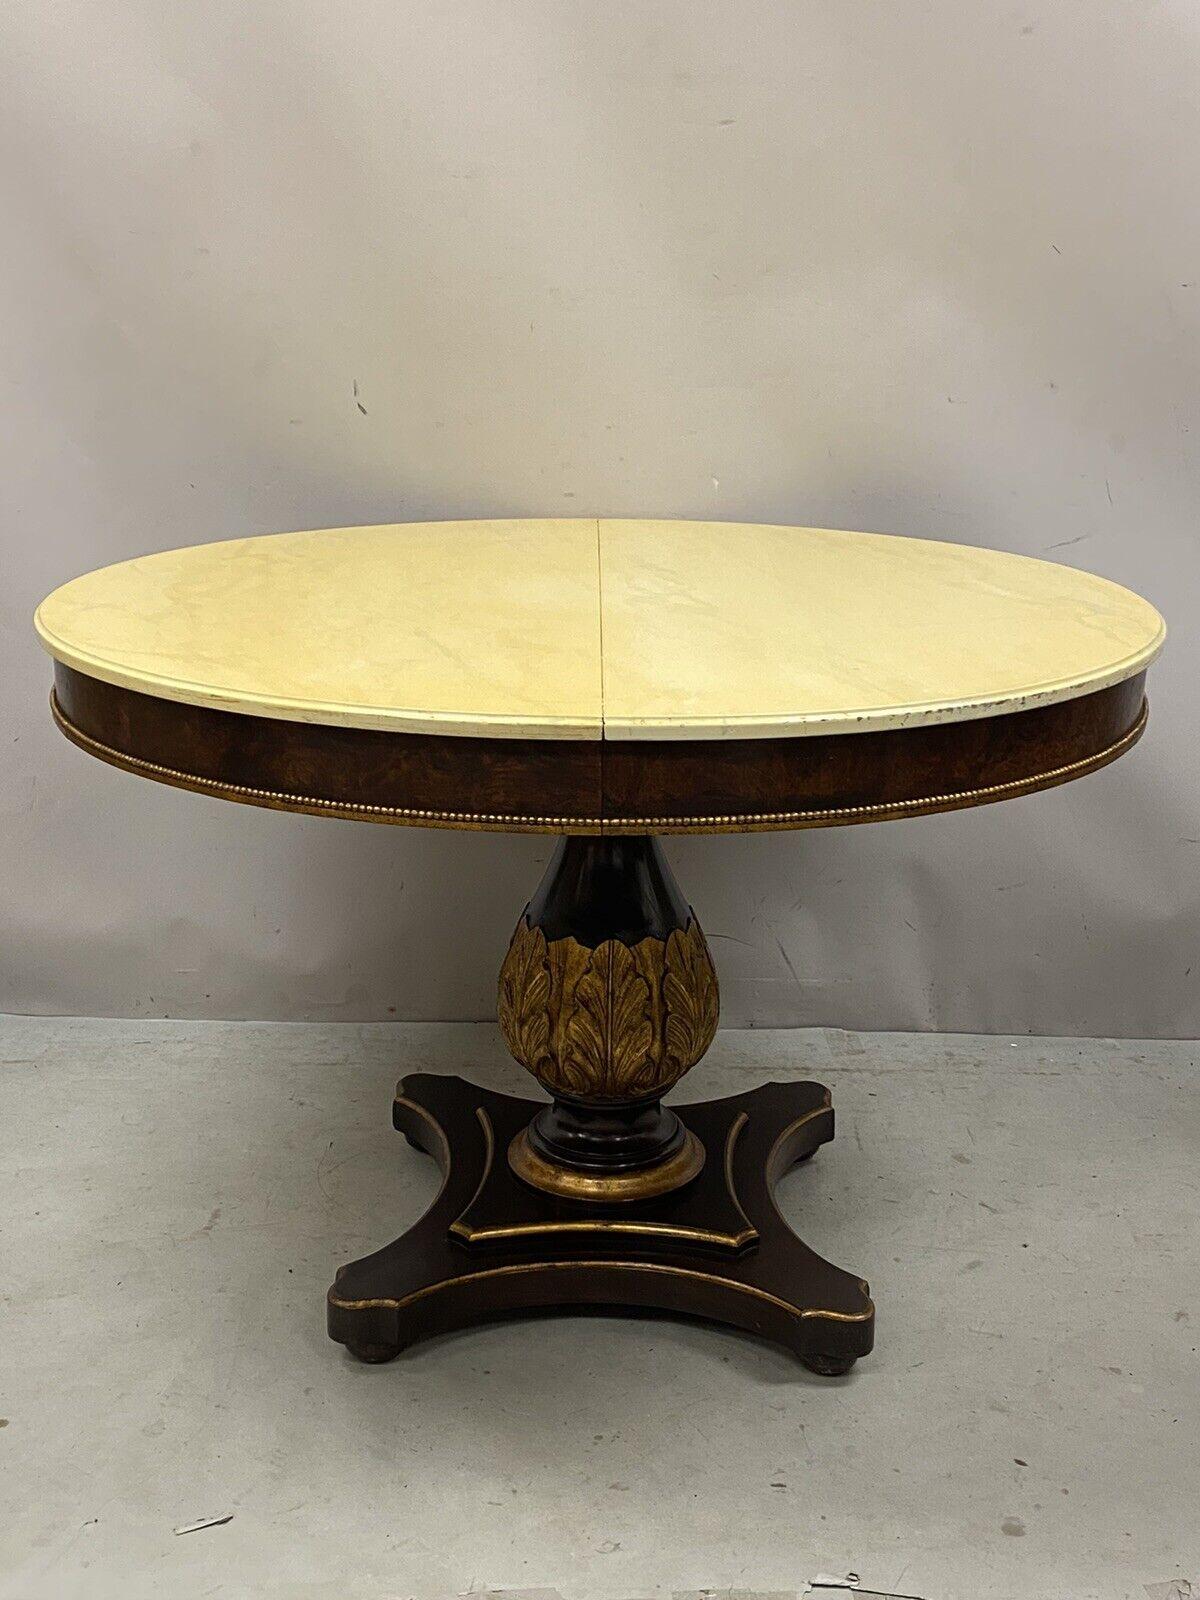 Vintage Italian Regency style pedestal base round dining table with cream Lacquer top. Item features (2) 18